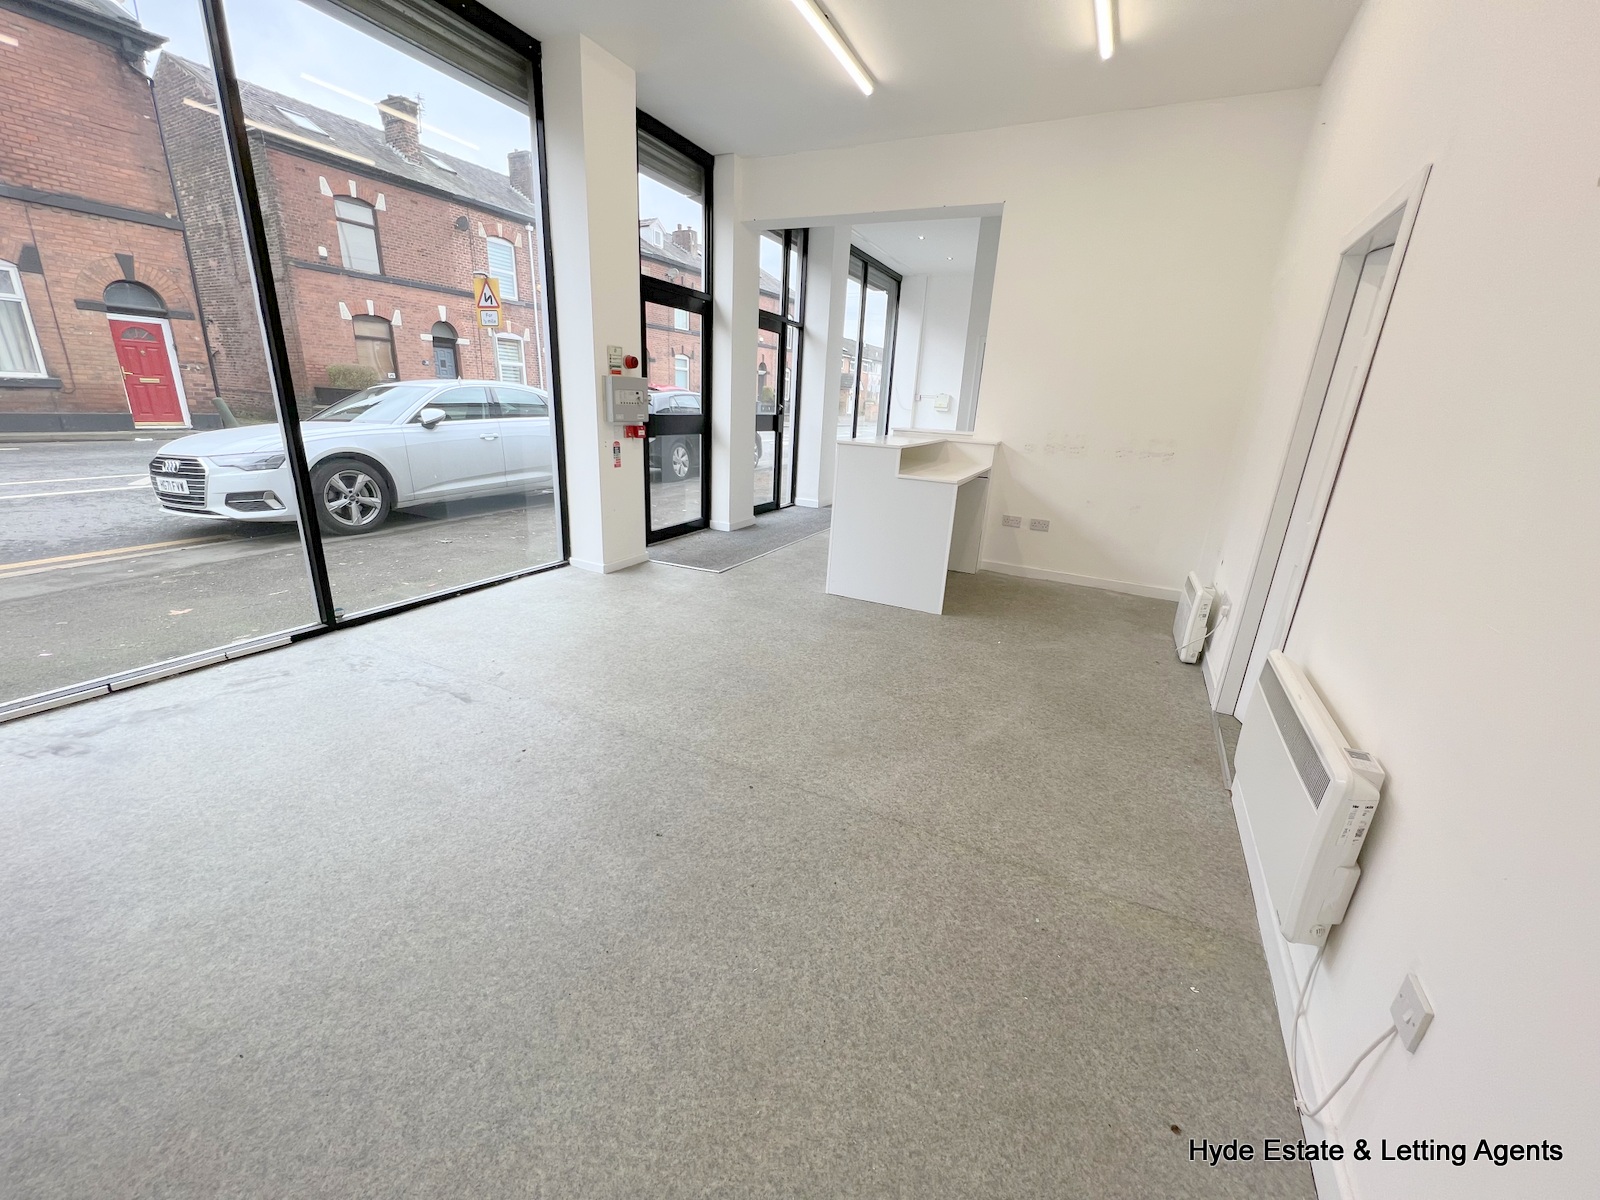 Images for 17-19, Bury Street, Radcliffe, Manchester, M26 2GB